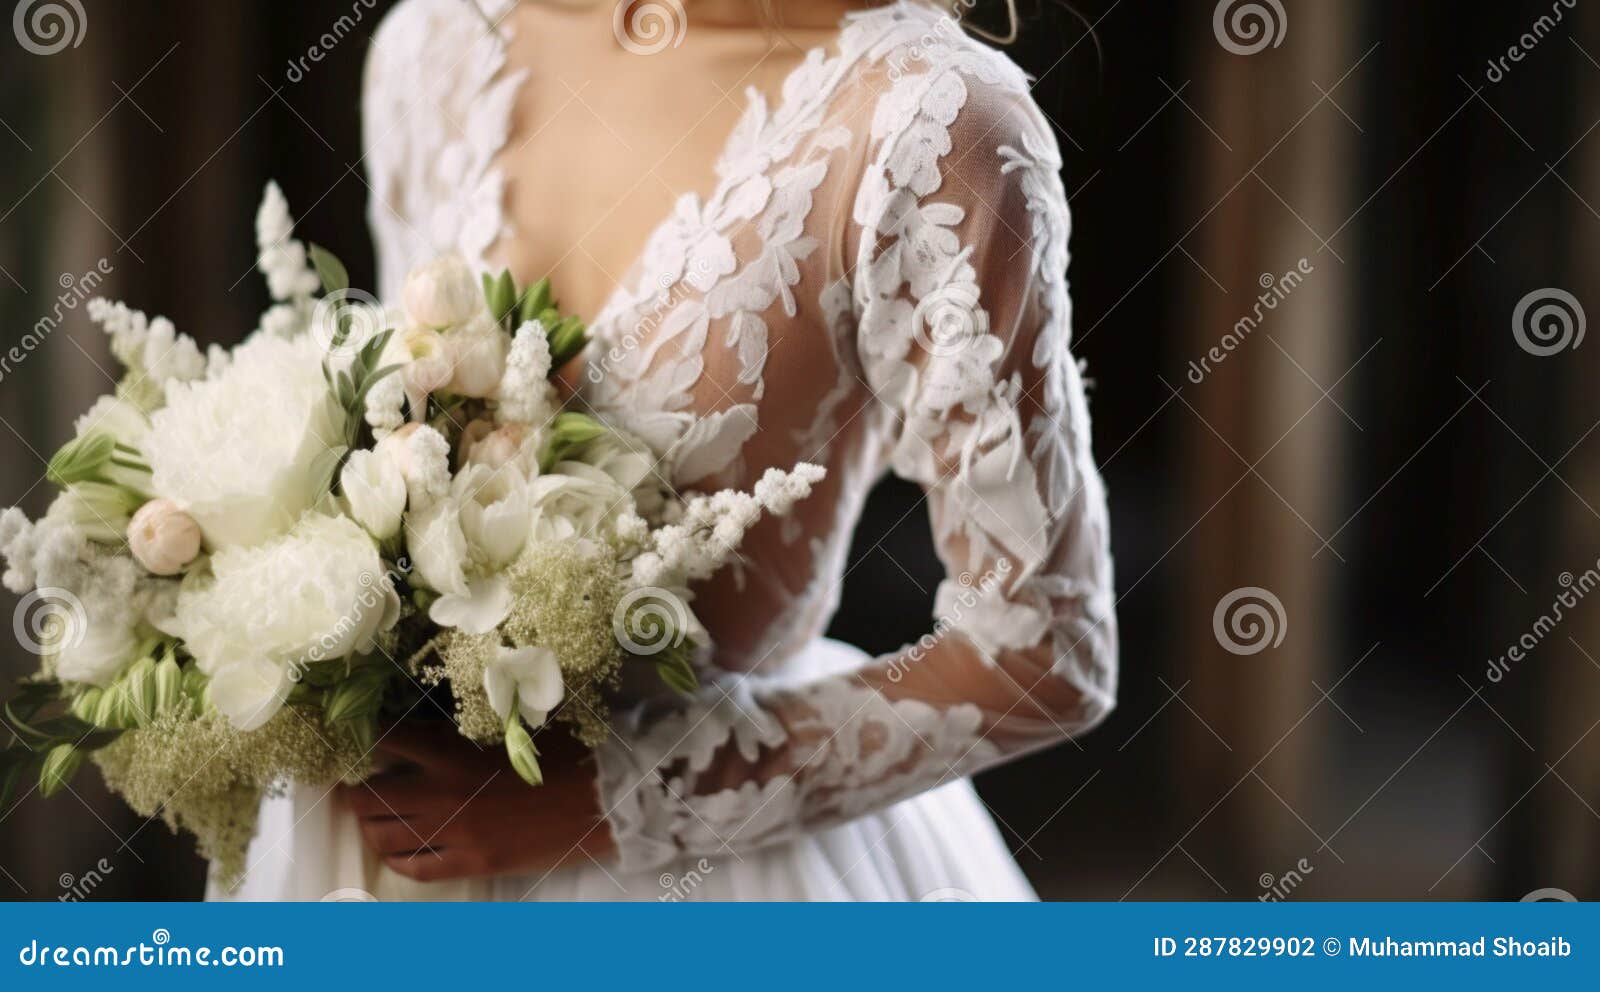 elegantly attired bride embraces bouquet, her dress and details reflecting timeless love